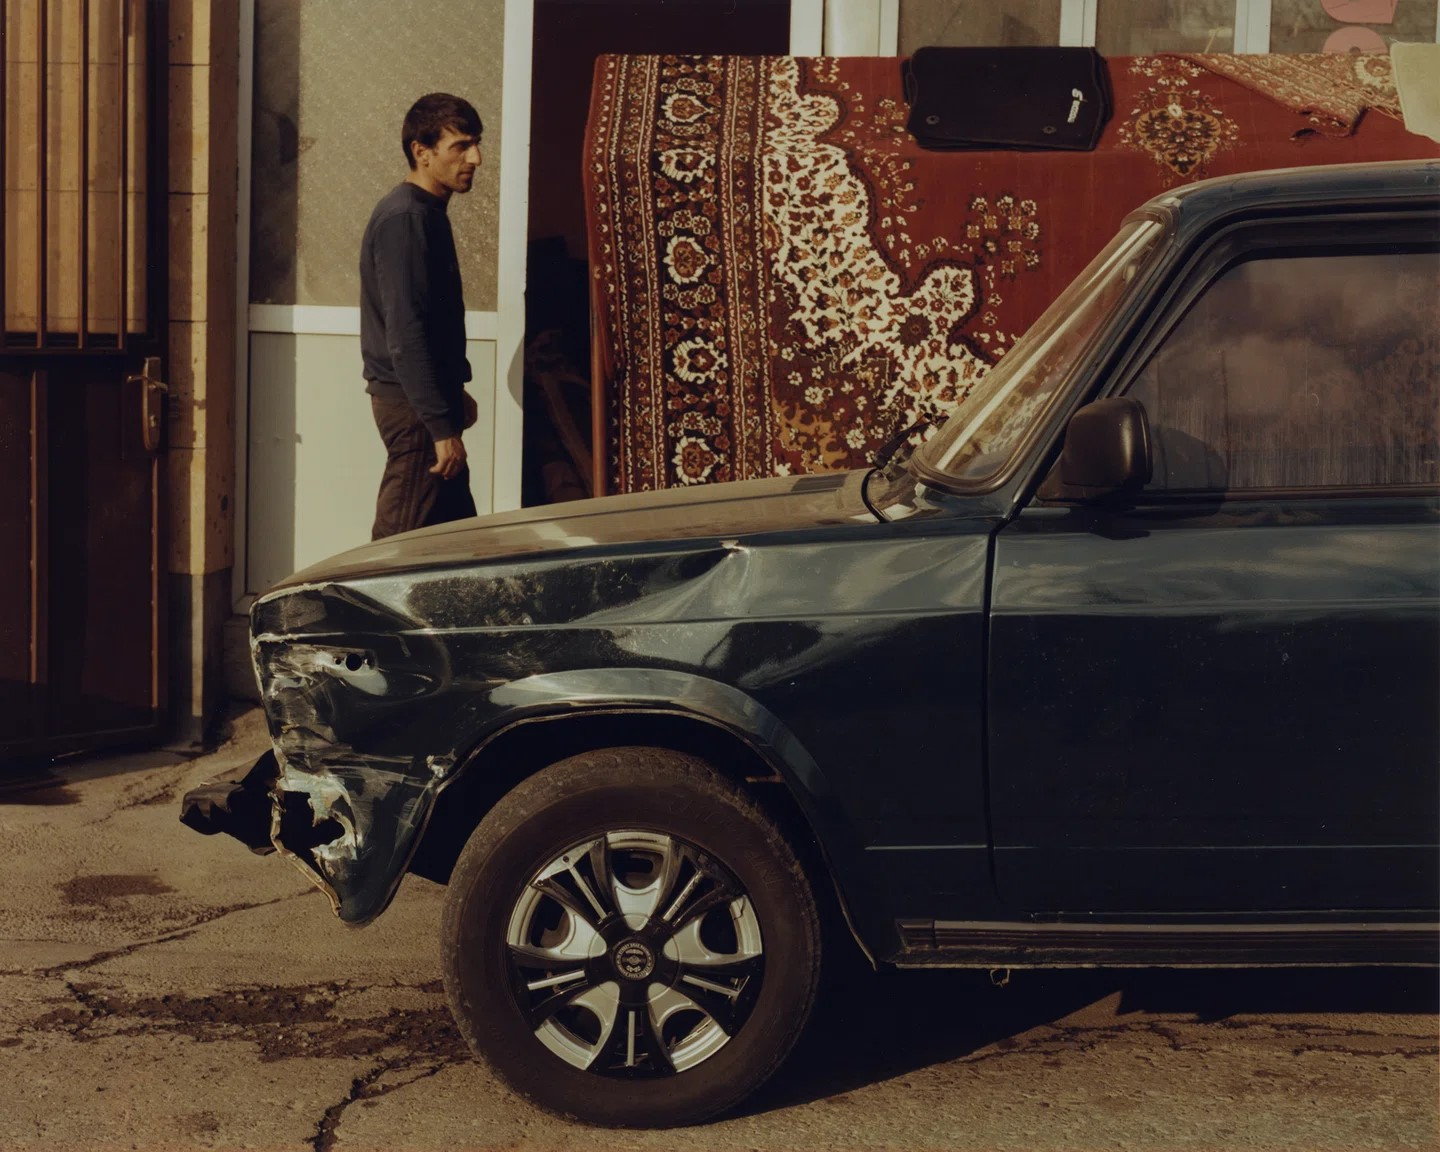 Front end of a bullet-riddled Lada Car parked in front of a striking Oriental rug.